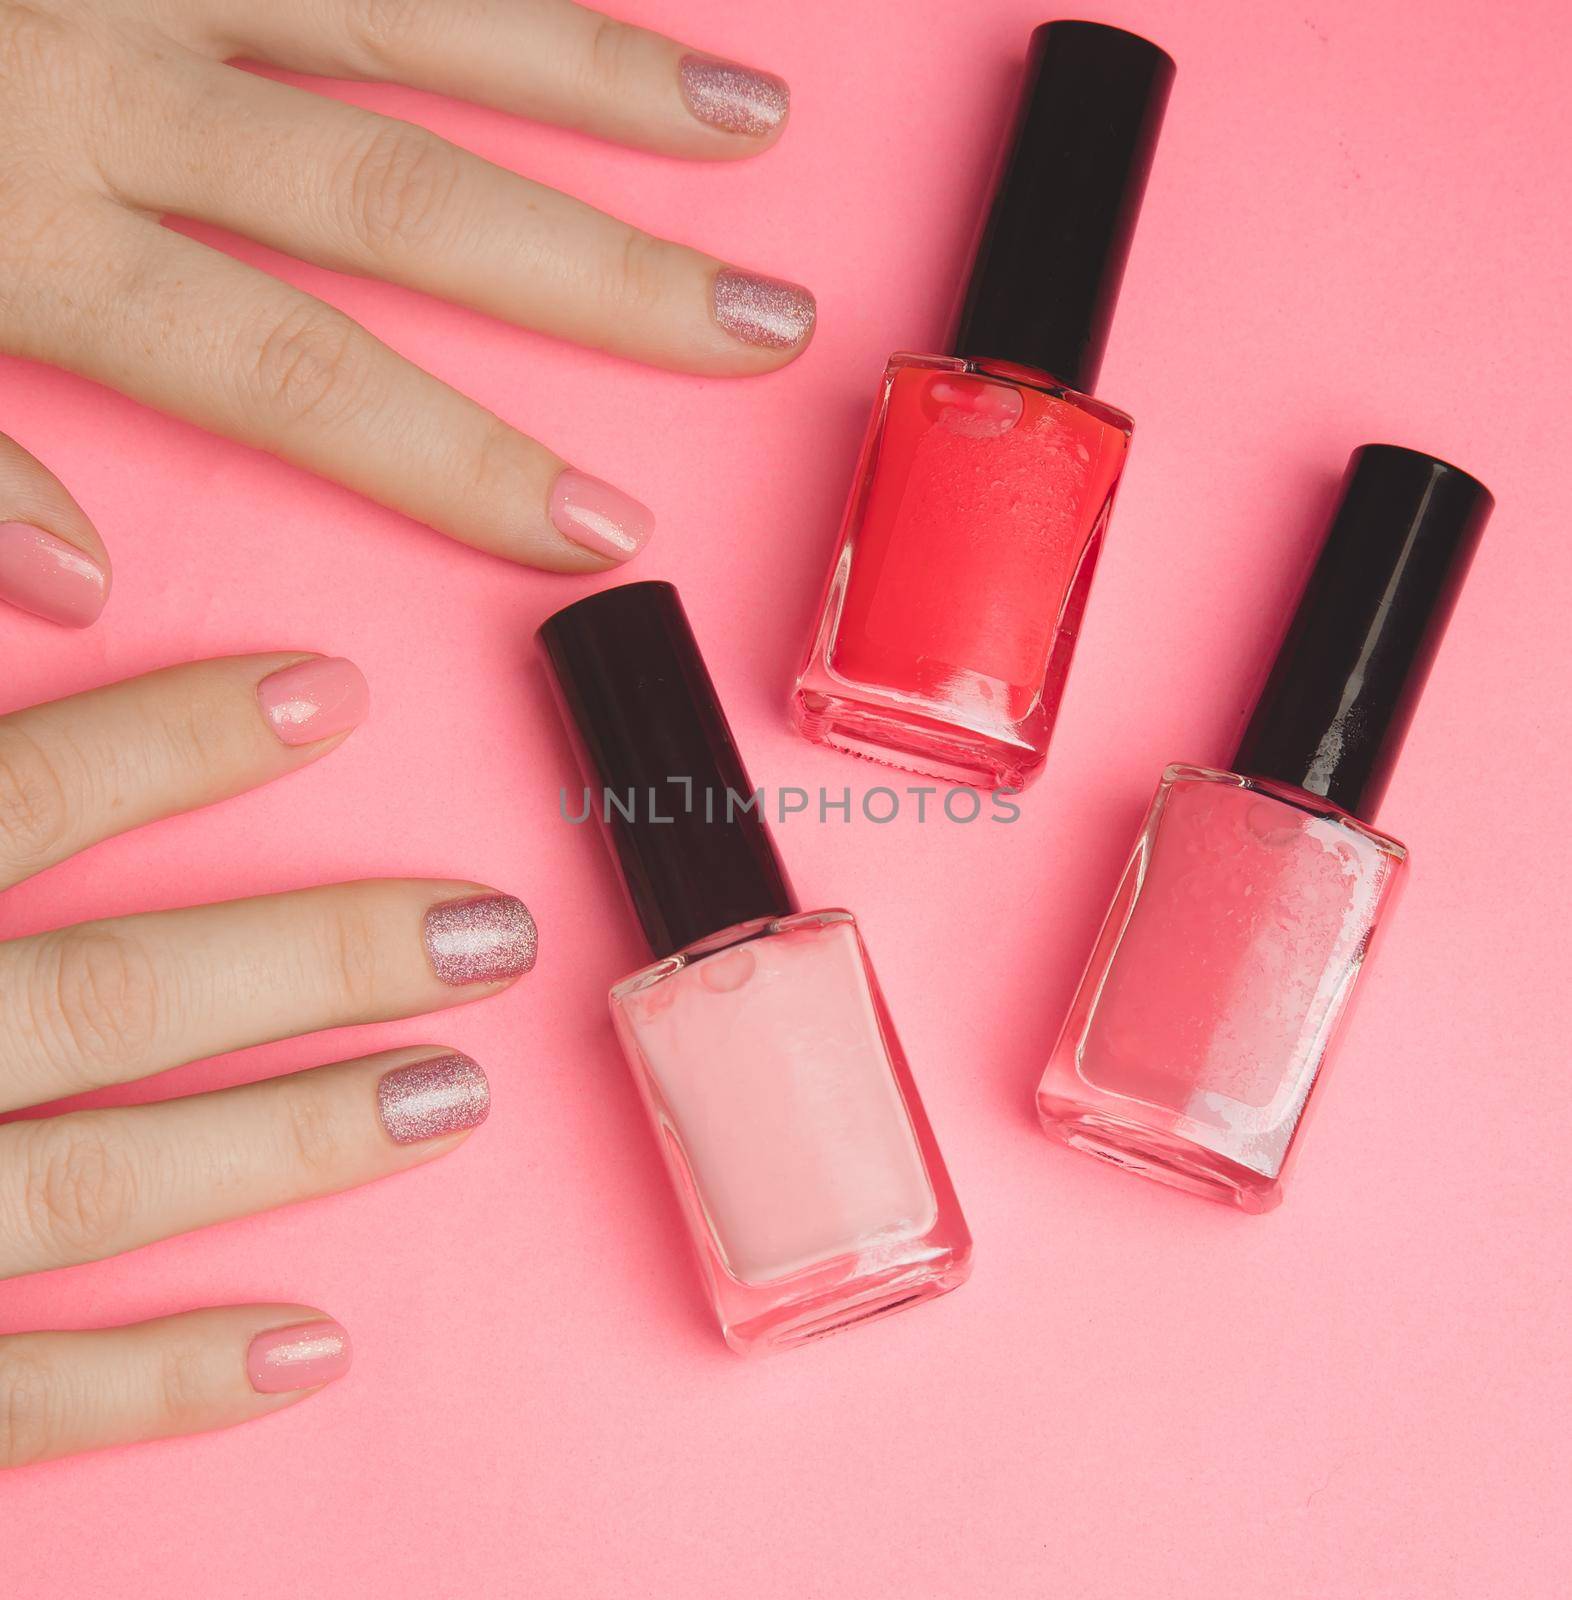 Nail polish in a woman's hand copy space. Article about manicure. Gel polish. Hand care . Pink background